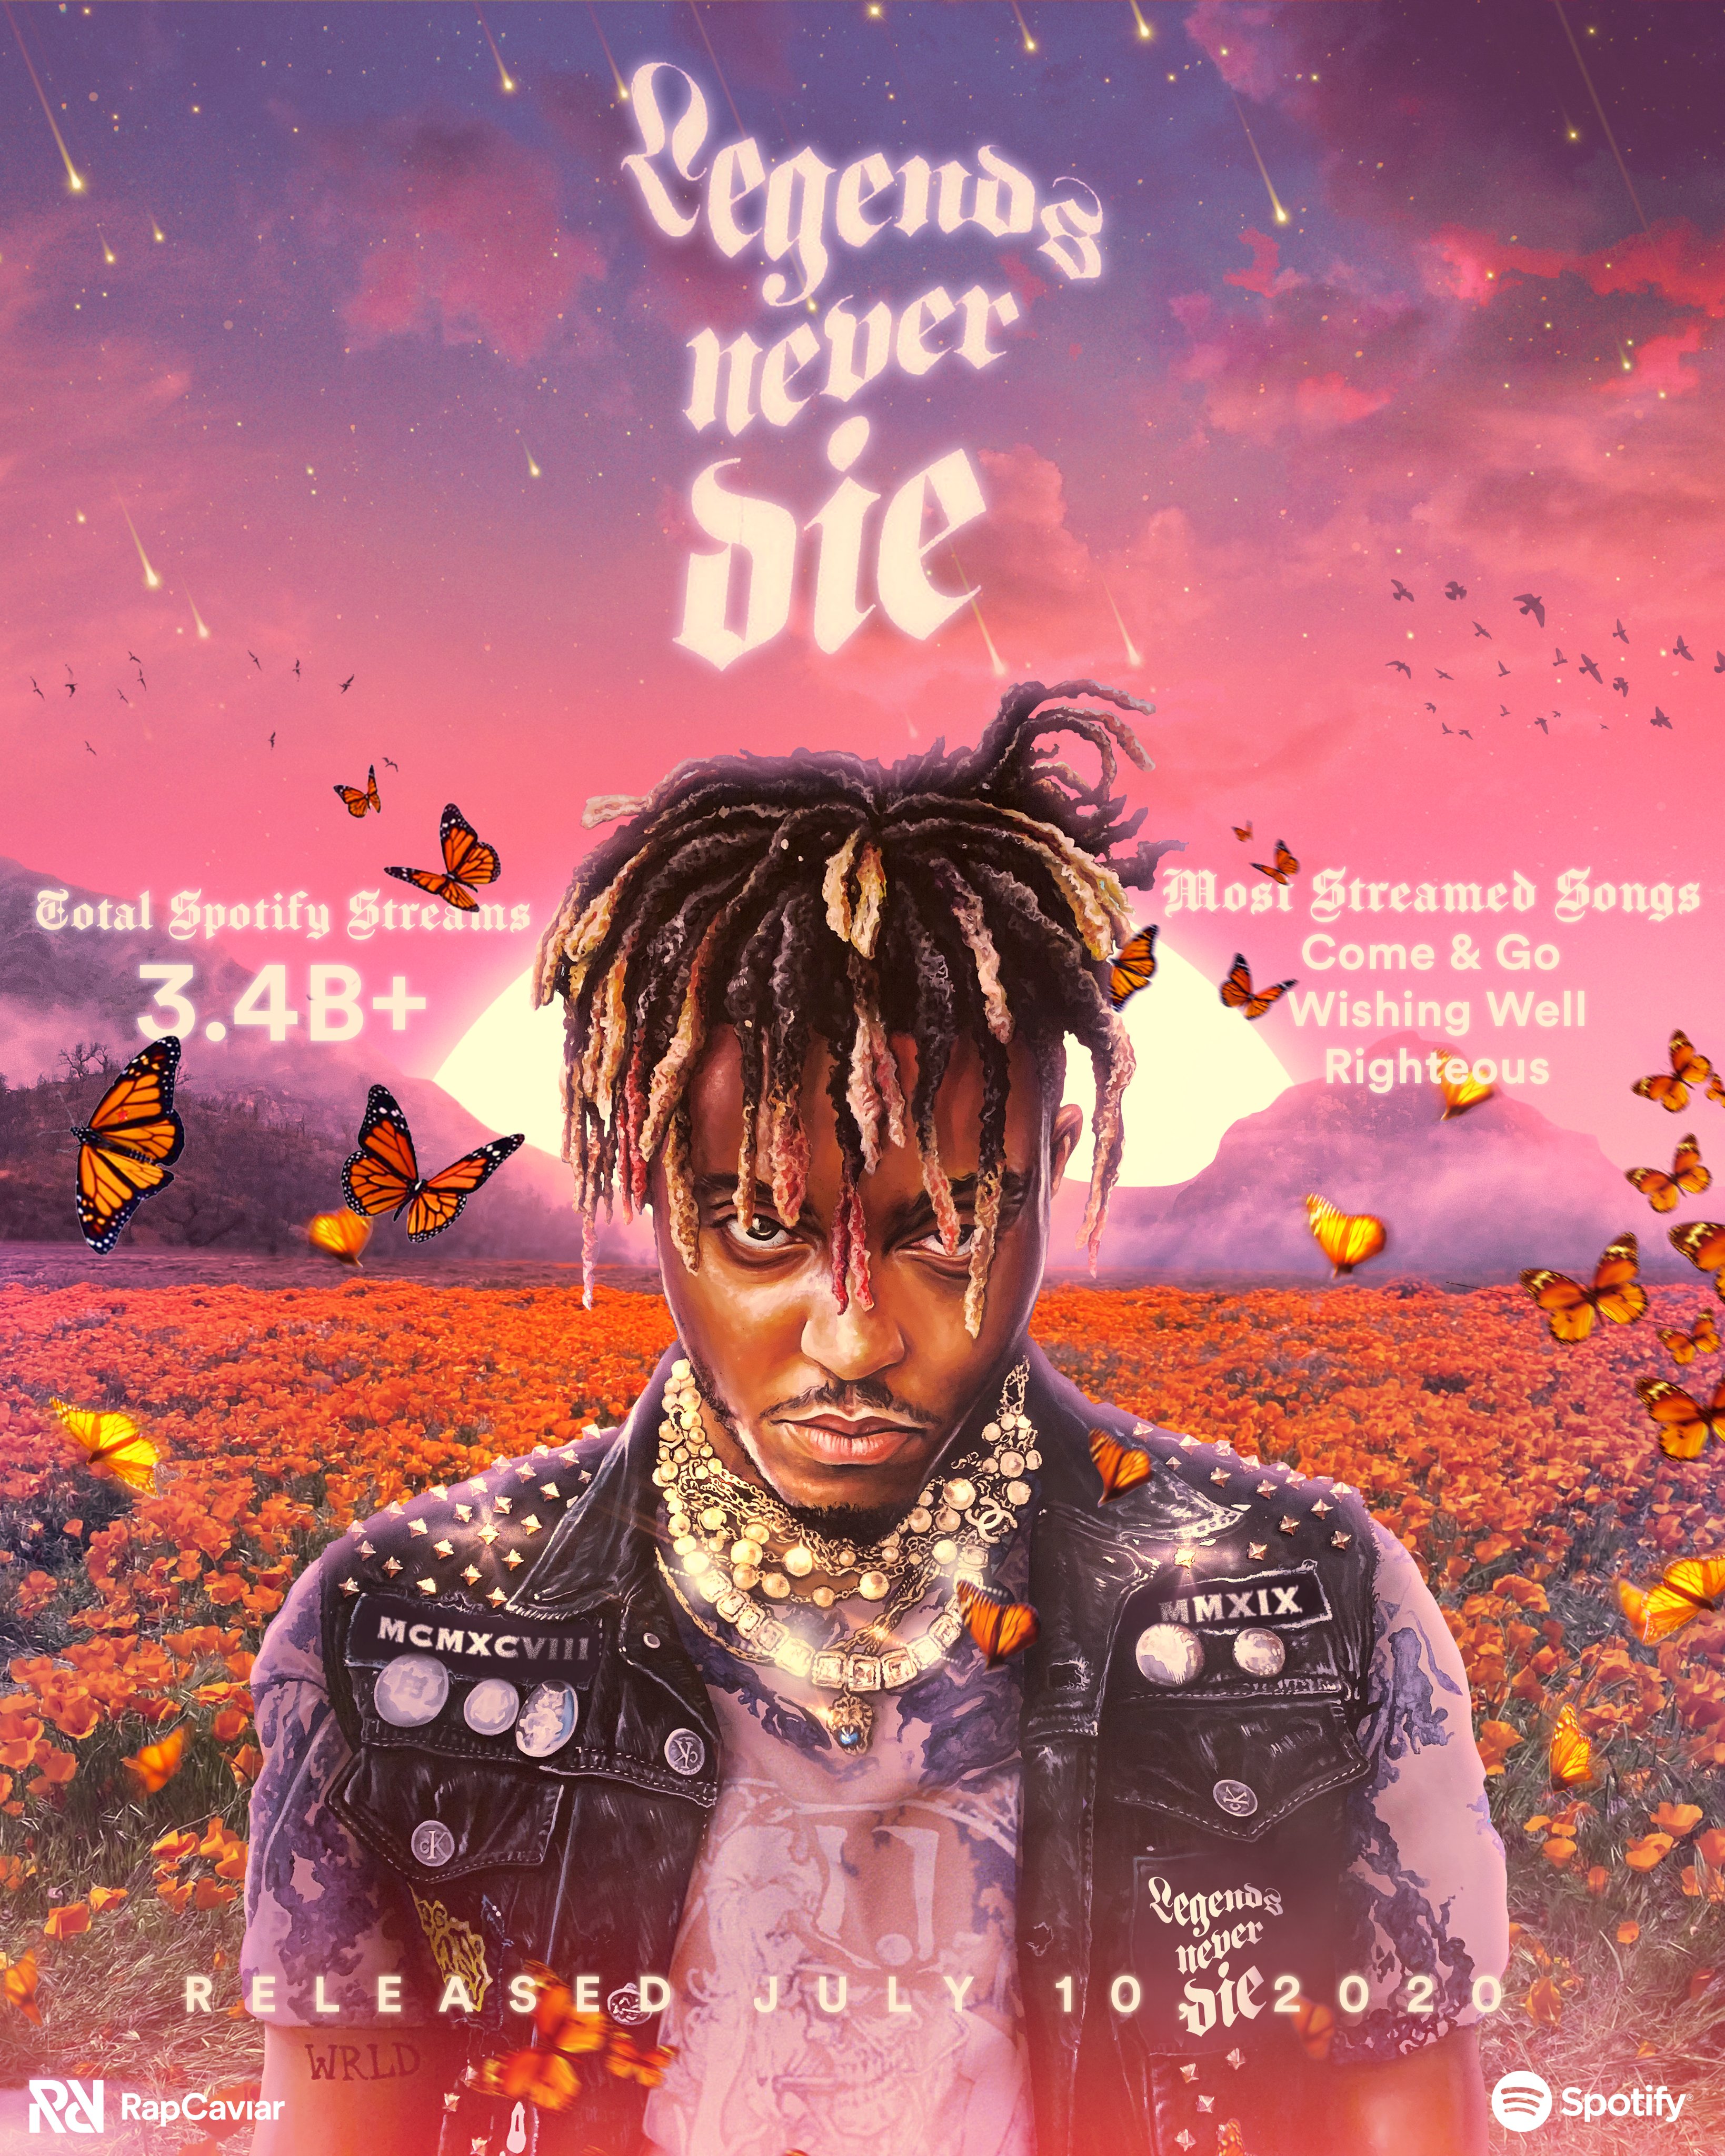 RapCaviar on X: Juice WRLD's Legends Never Die turns 1 today 🦋 What's  your favorite song from the album?  / X